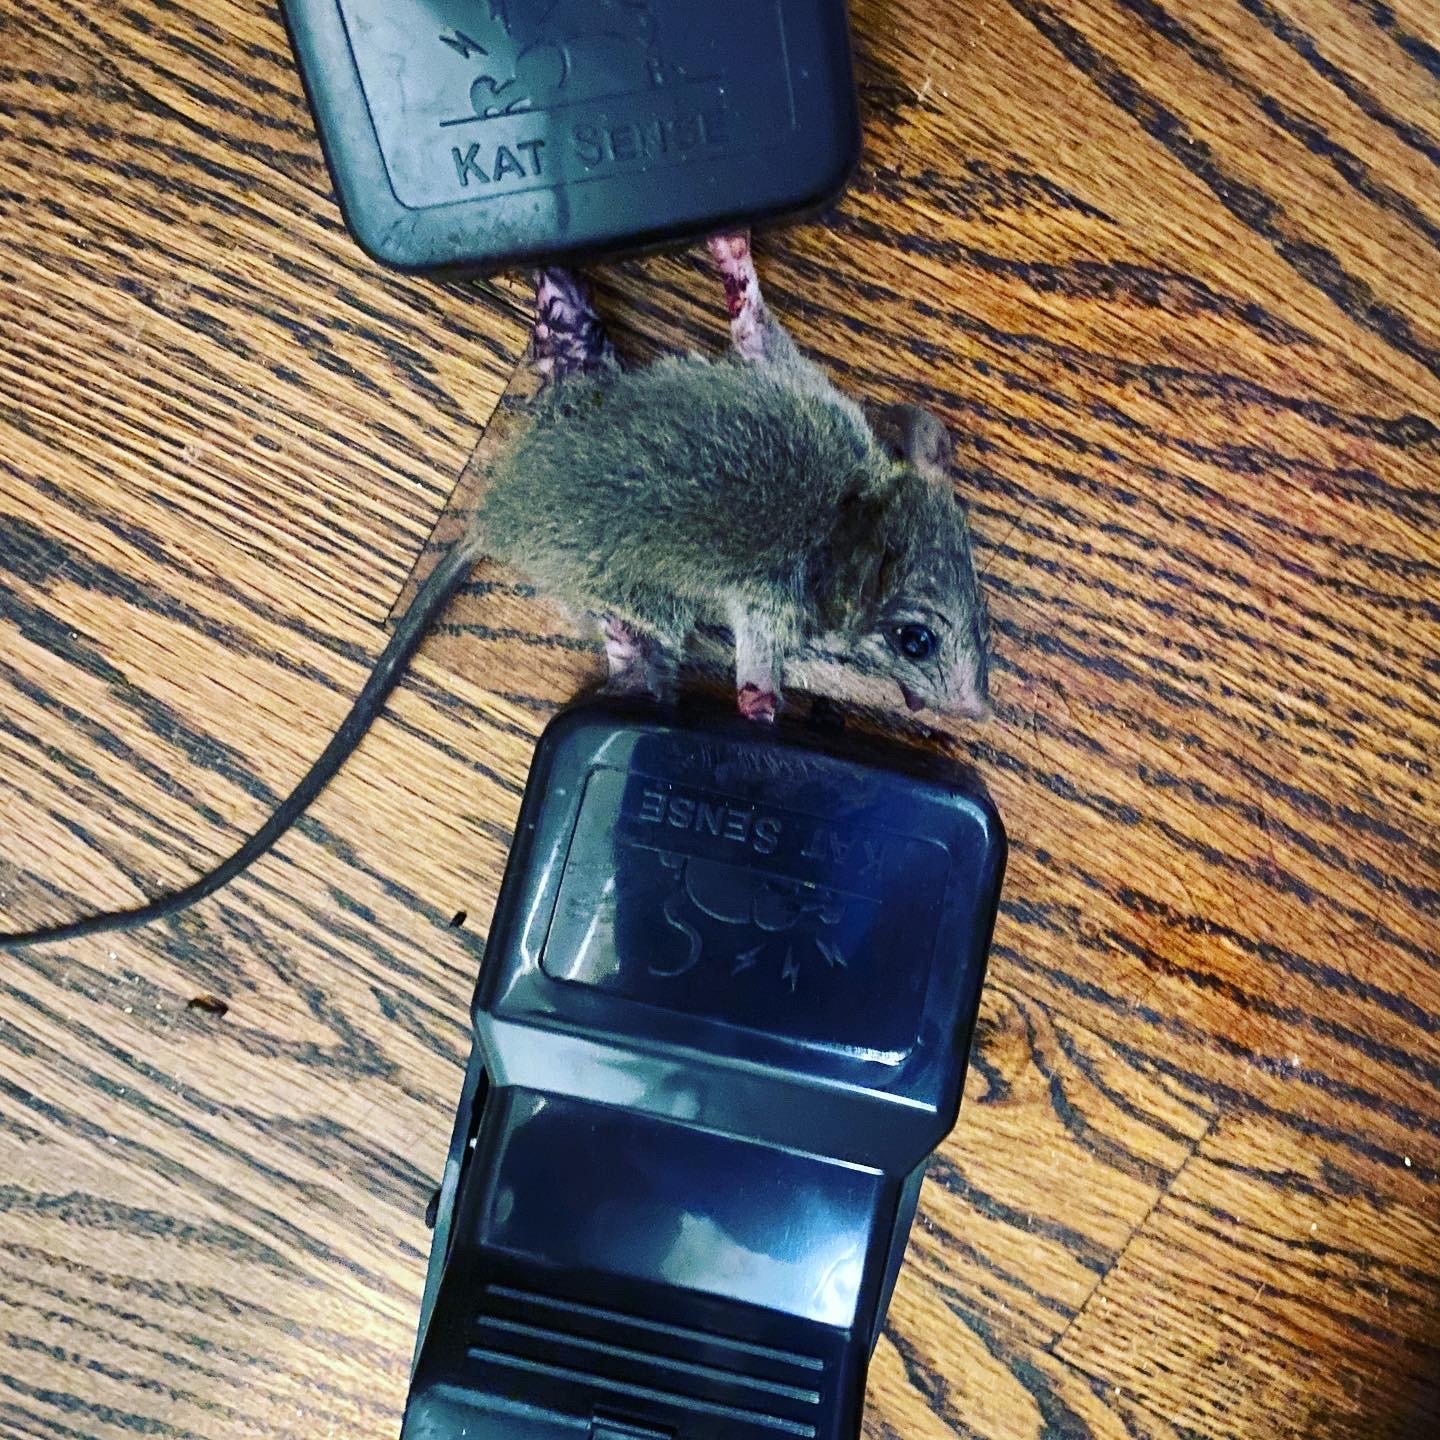 Rat Vs. Mouse: Is There A Difference Between Mice & Rats